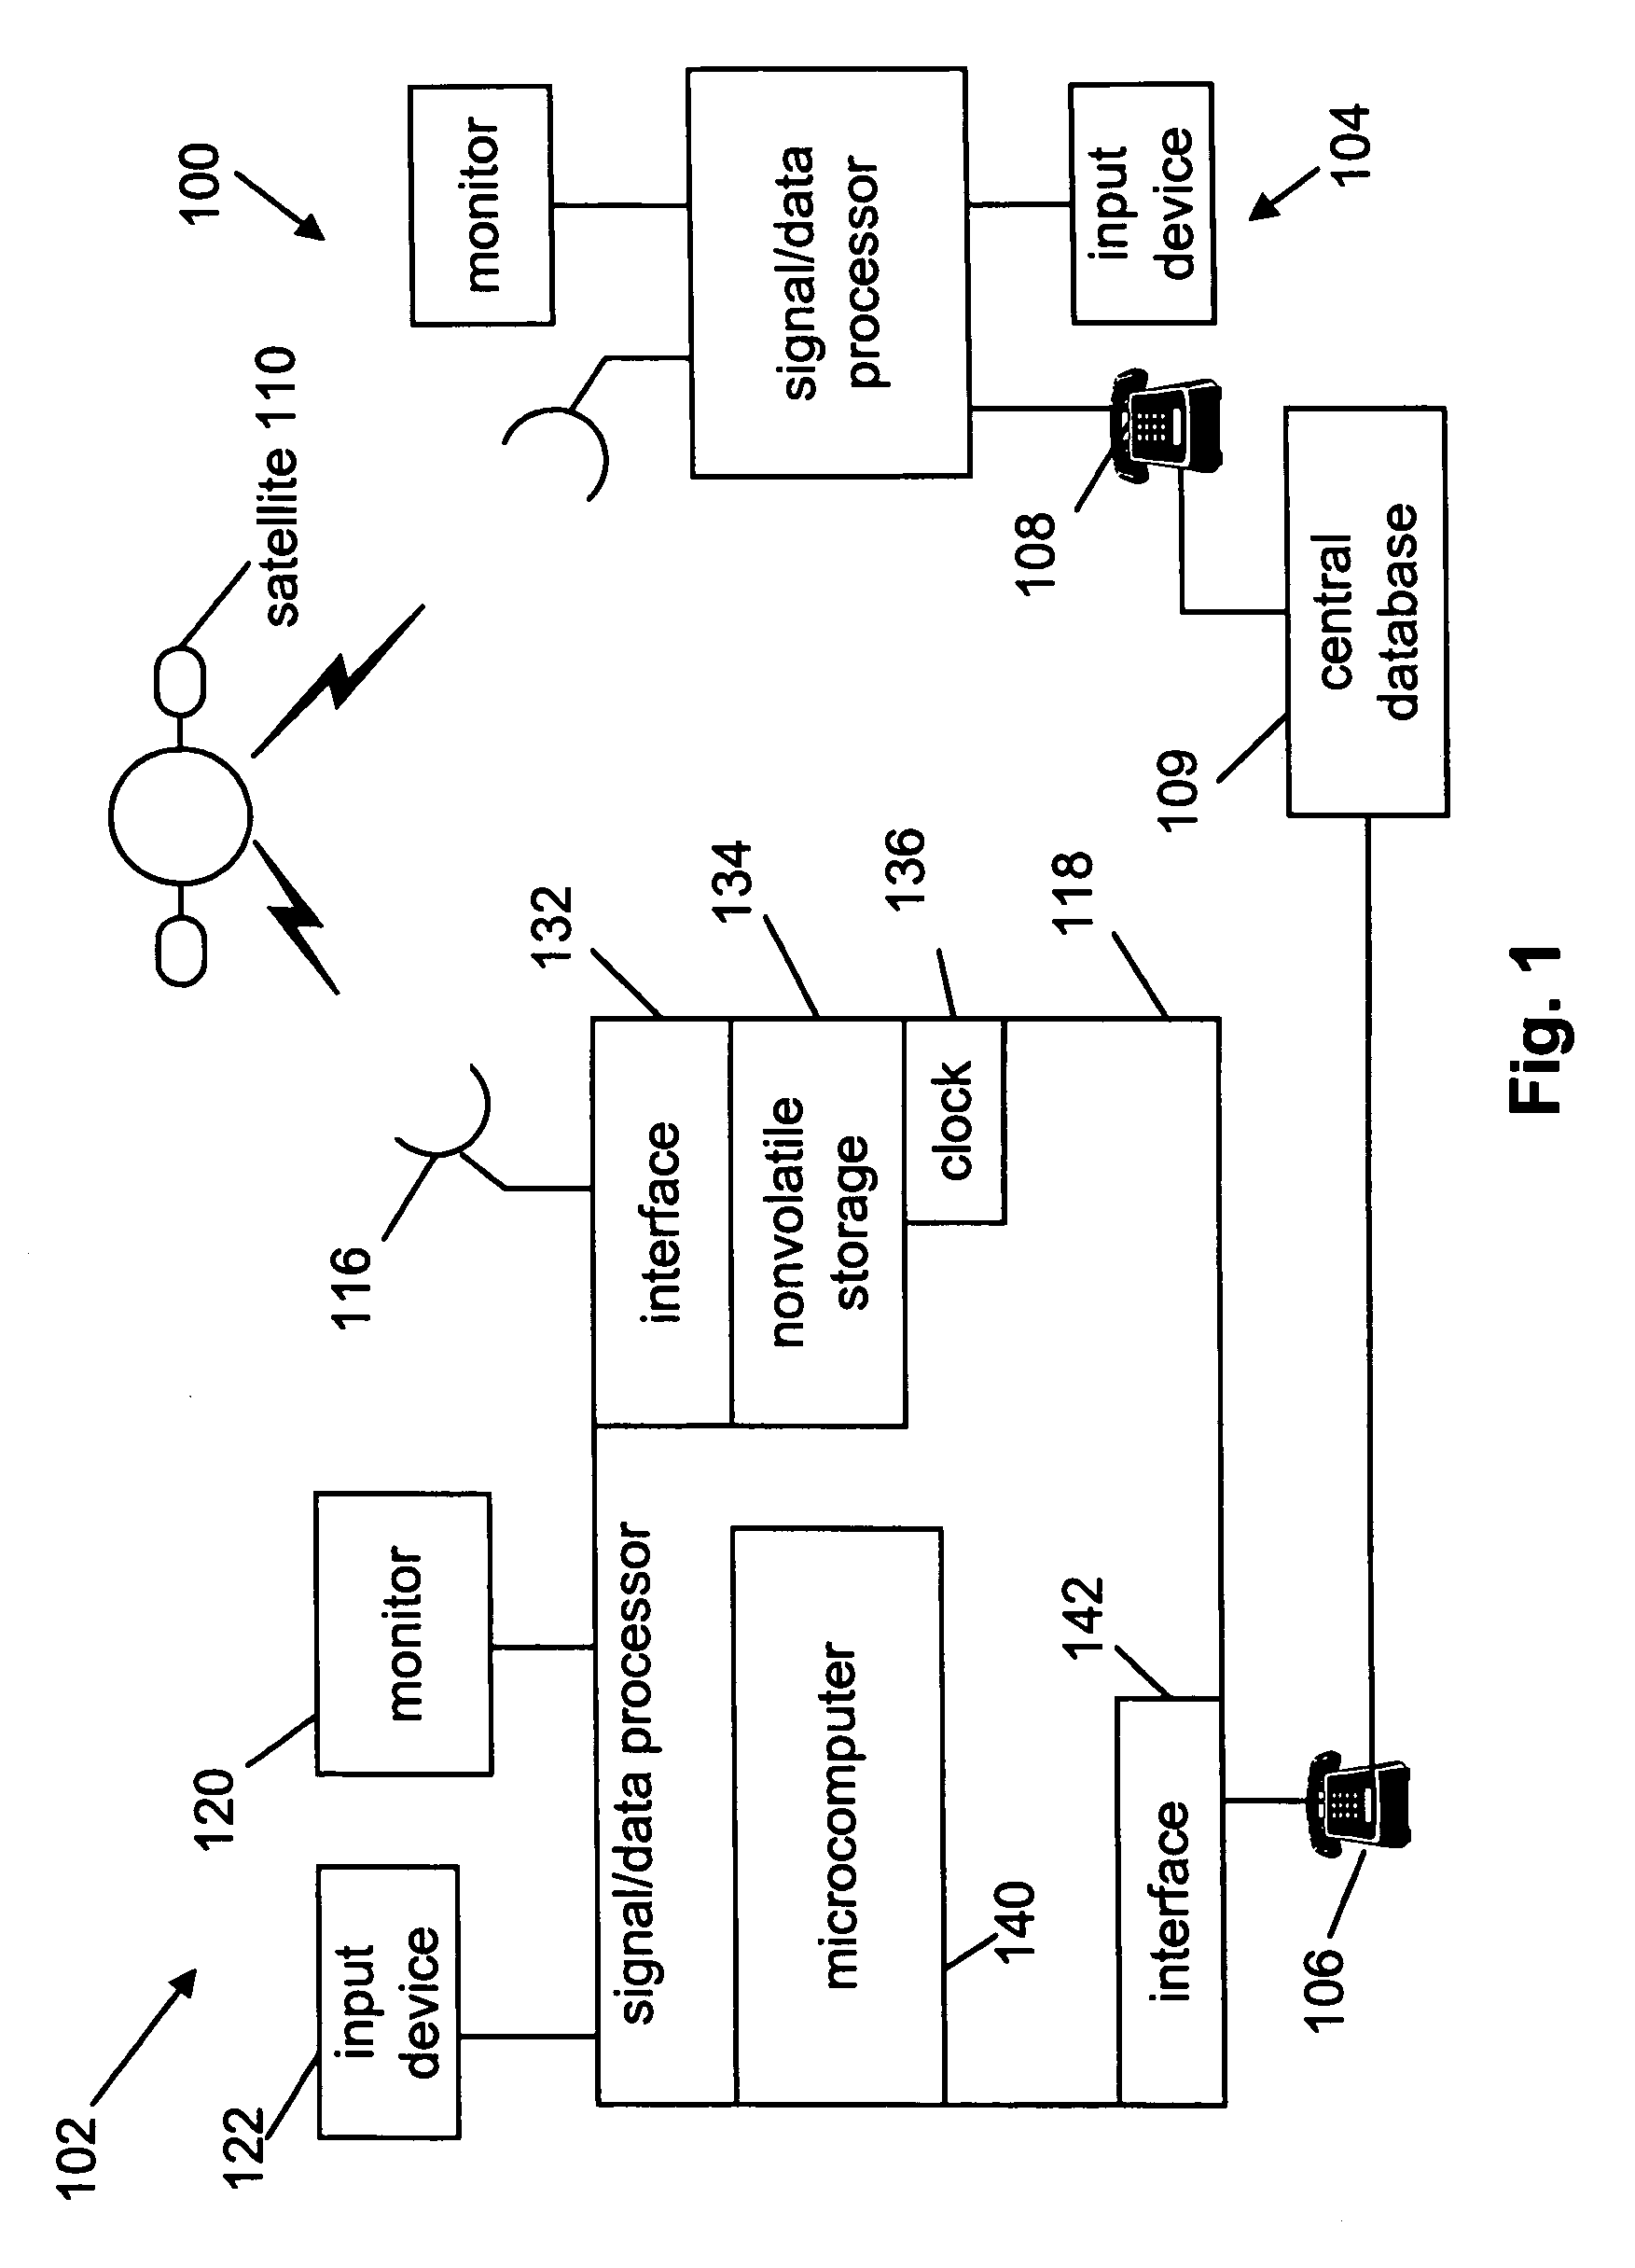 Information distribution and processing system